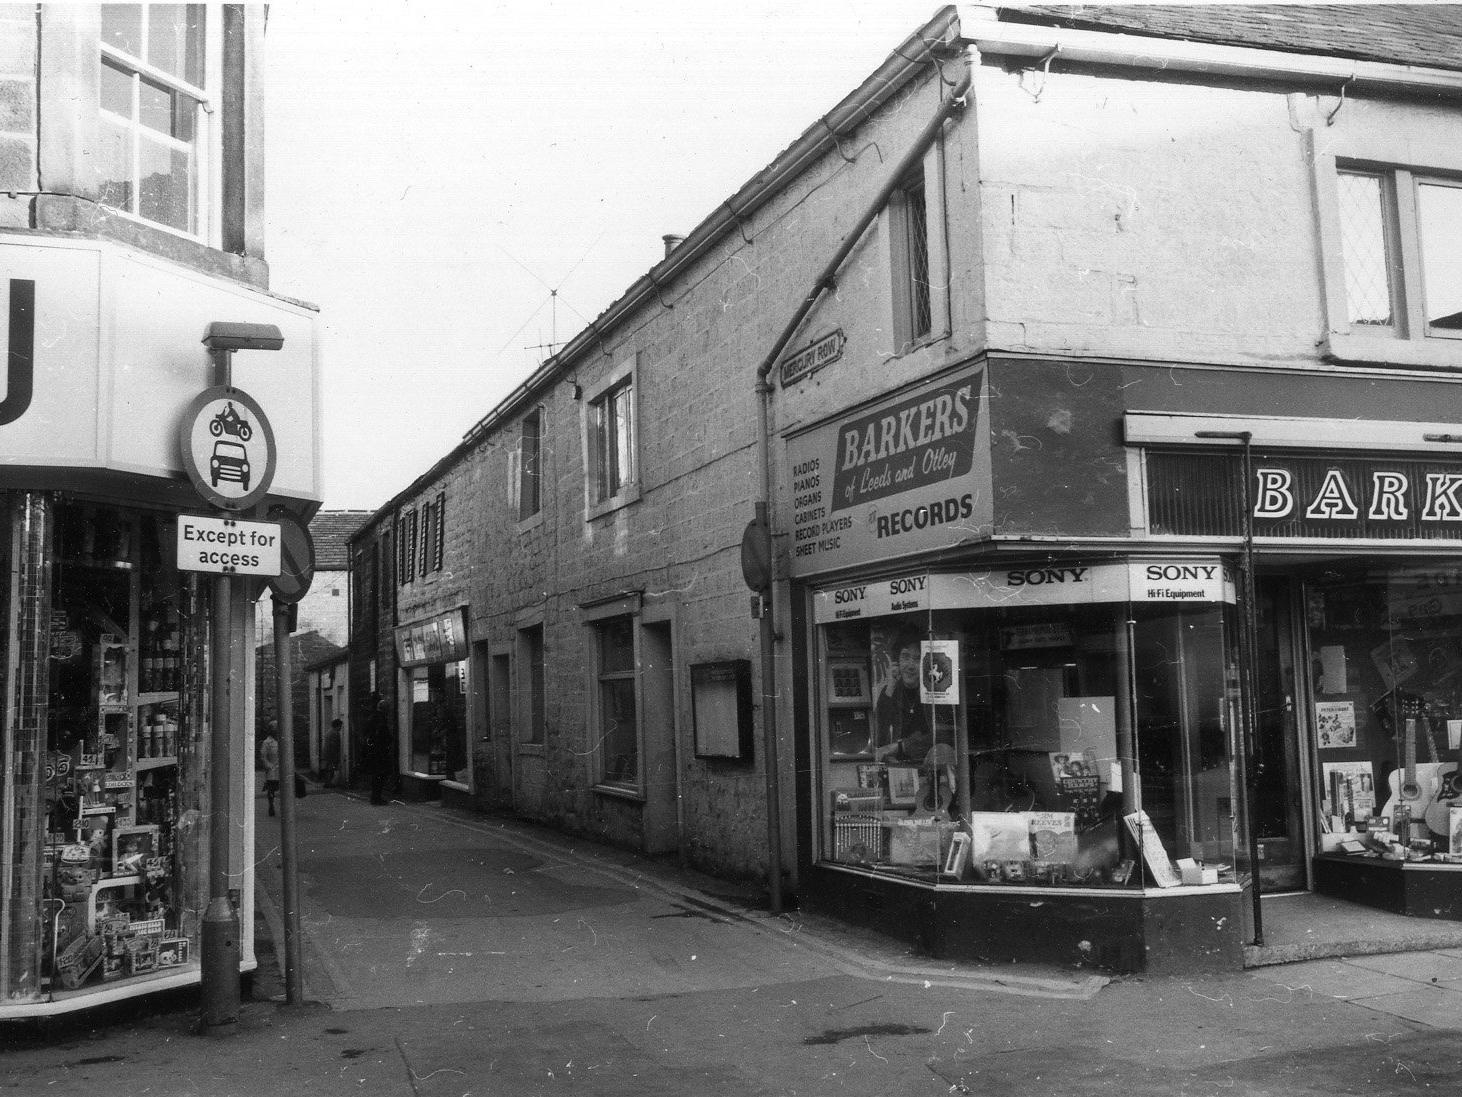 Kirkgate at the junction with Mercury Row. To the right of the junction is Barkers musical instruments and records. On the left, part of Bakers clothiers and drapers can be seen.